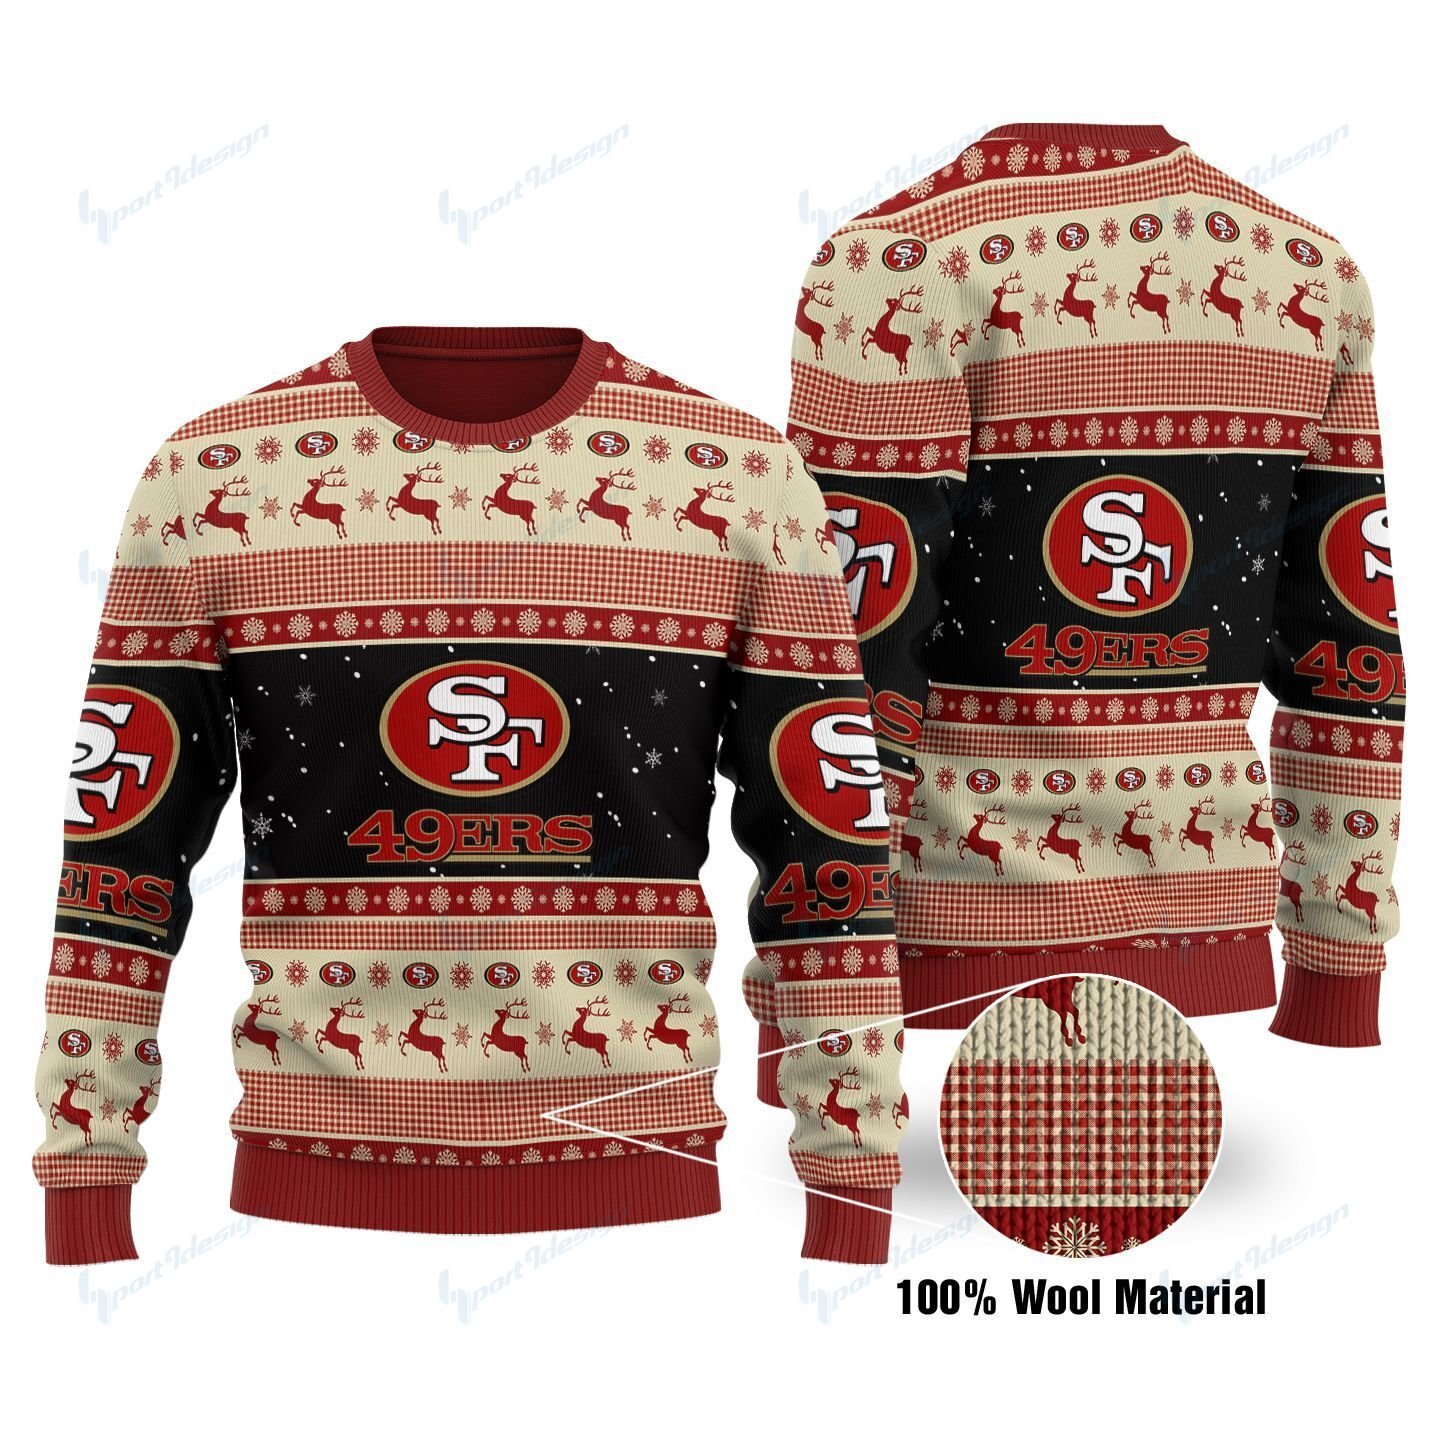 San Francisco 49ers Sweater 39 – Donelanetop Store